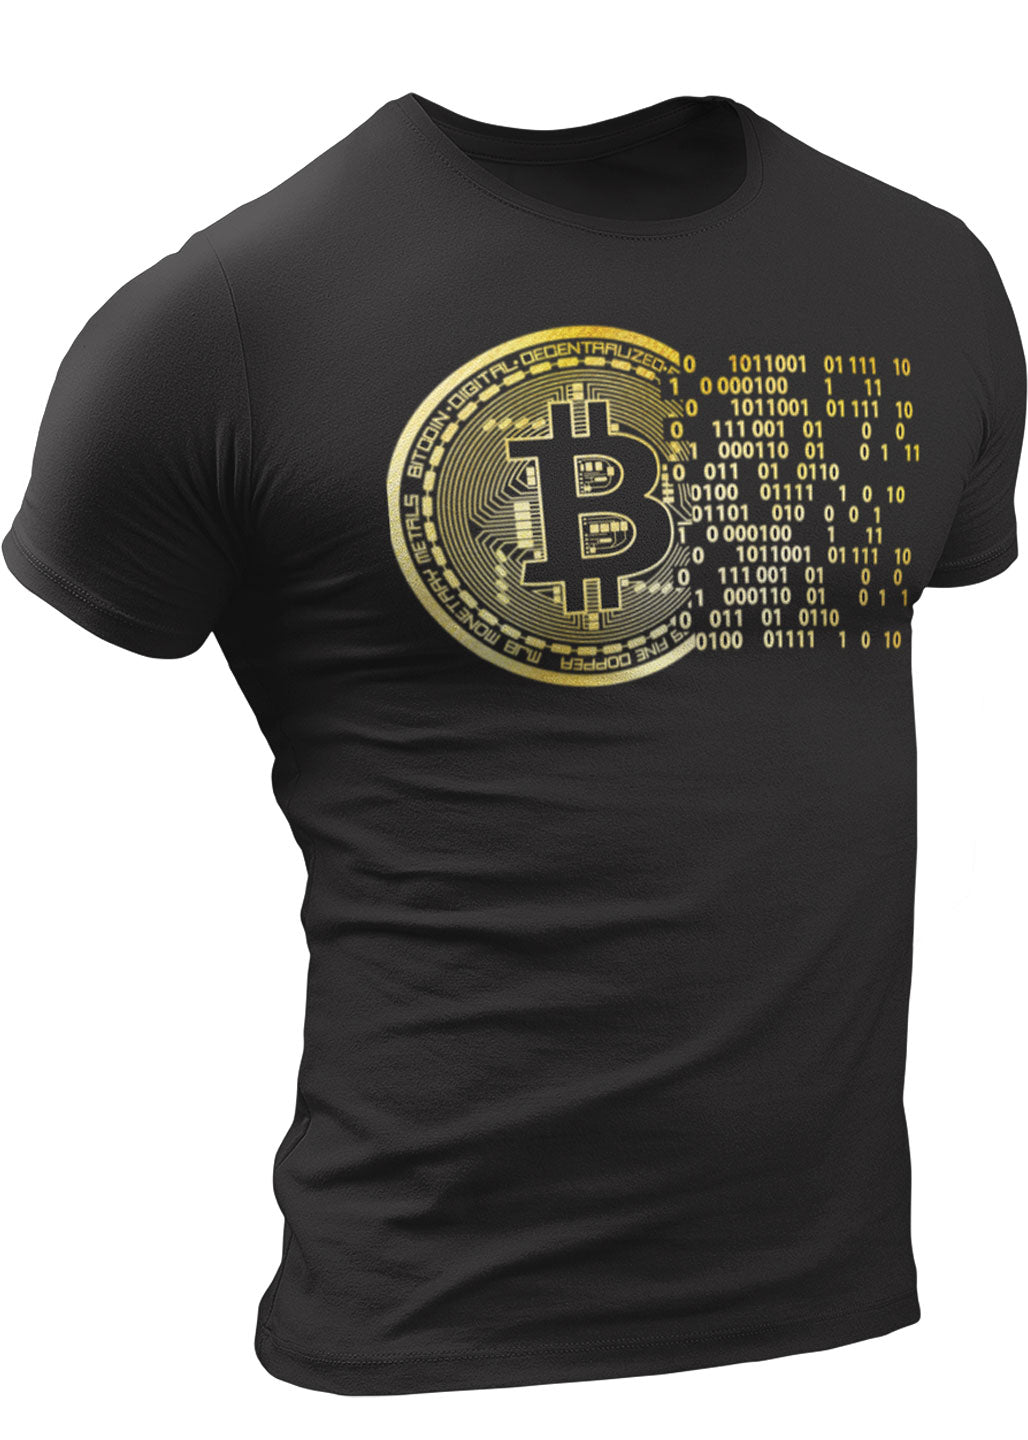 Get Bitcoin T Shirt Ebay Pictures